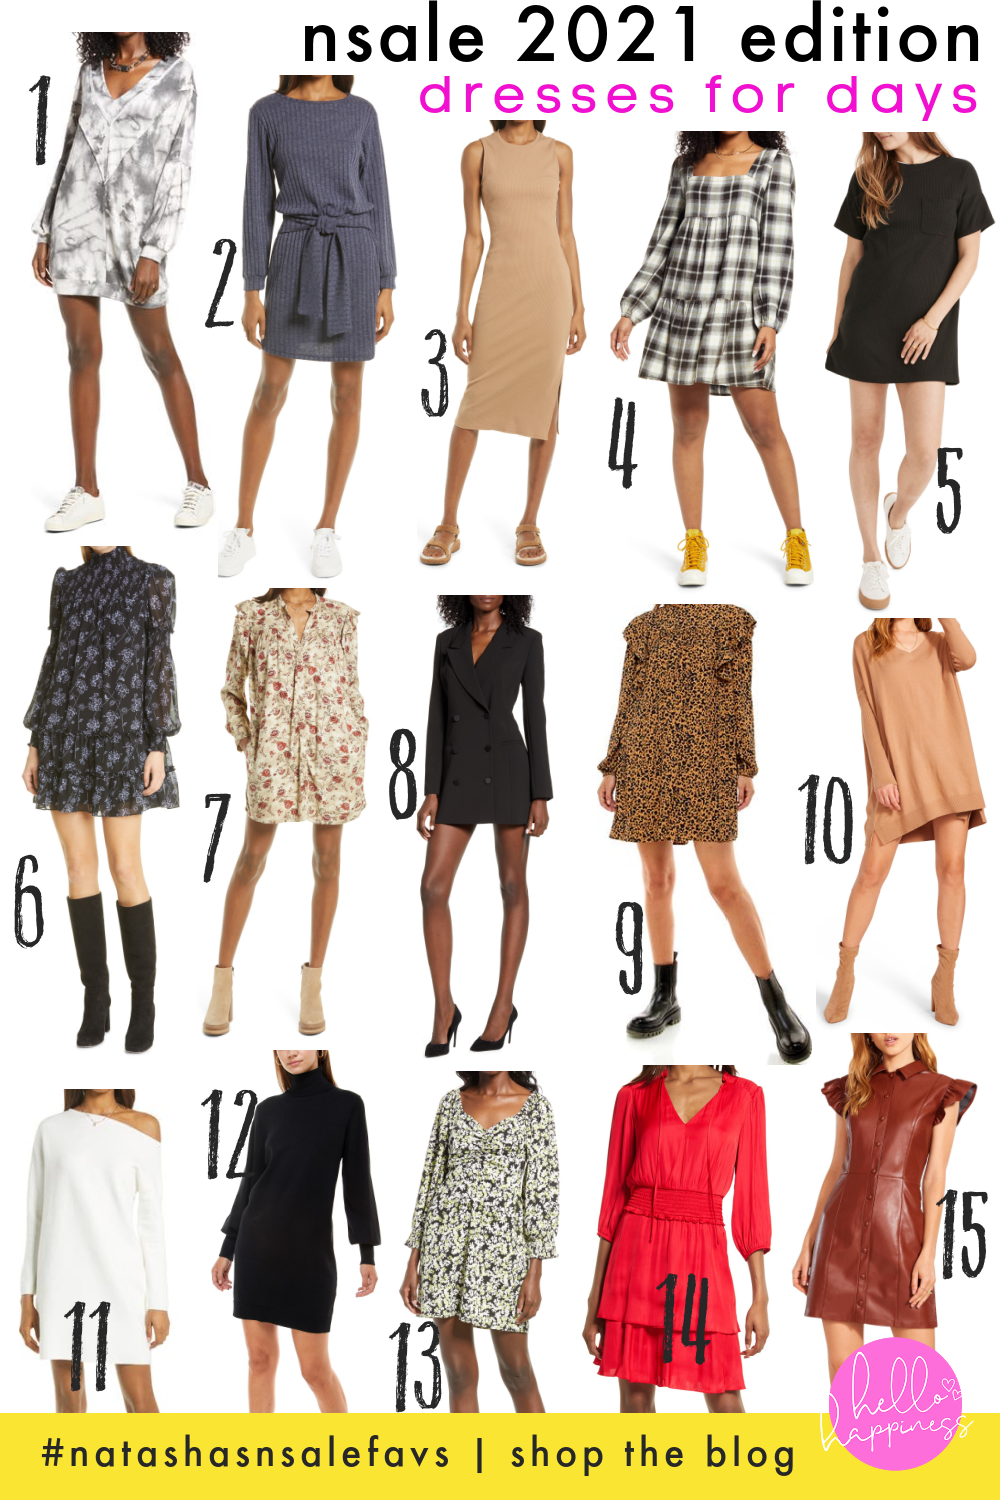 Nordstrom Anniversary Sale by popular Nashville fashion blog, Hello Happiness: collage image of a black and white tie dye dress, black and white plaid baby doll dress, black t-shirt dress, leopard print dress, sweater dress, off the shoulder white dress, black turtle neck dress, faux leather dress, tie waist dress, sleeveless knit body con dress, floral print puff sleeve dress, and black blazer dress.  